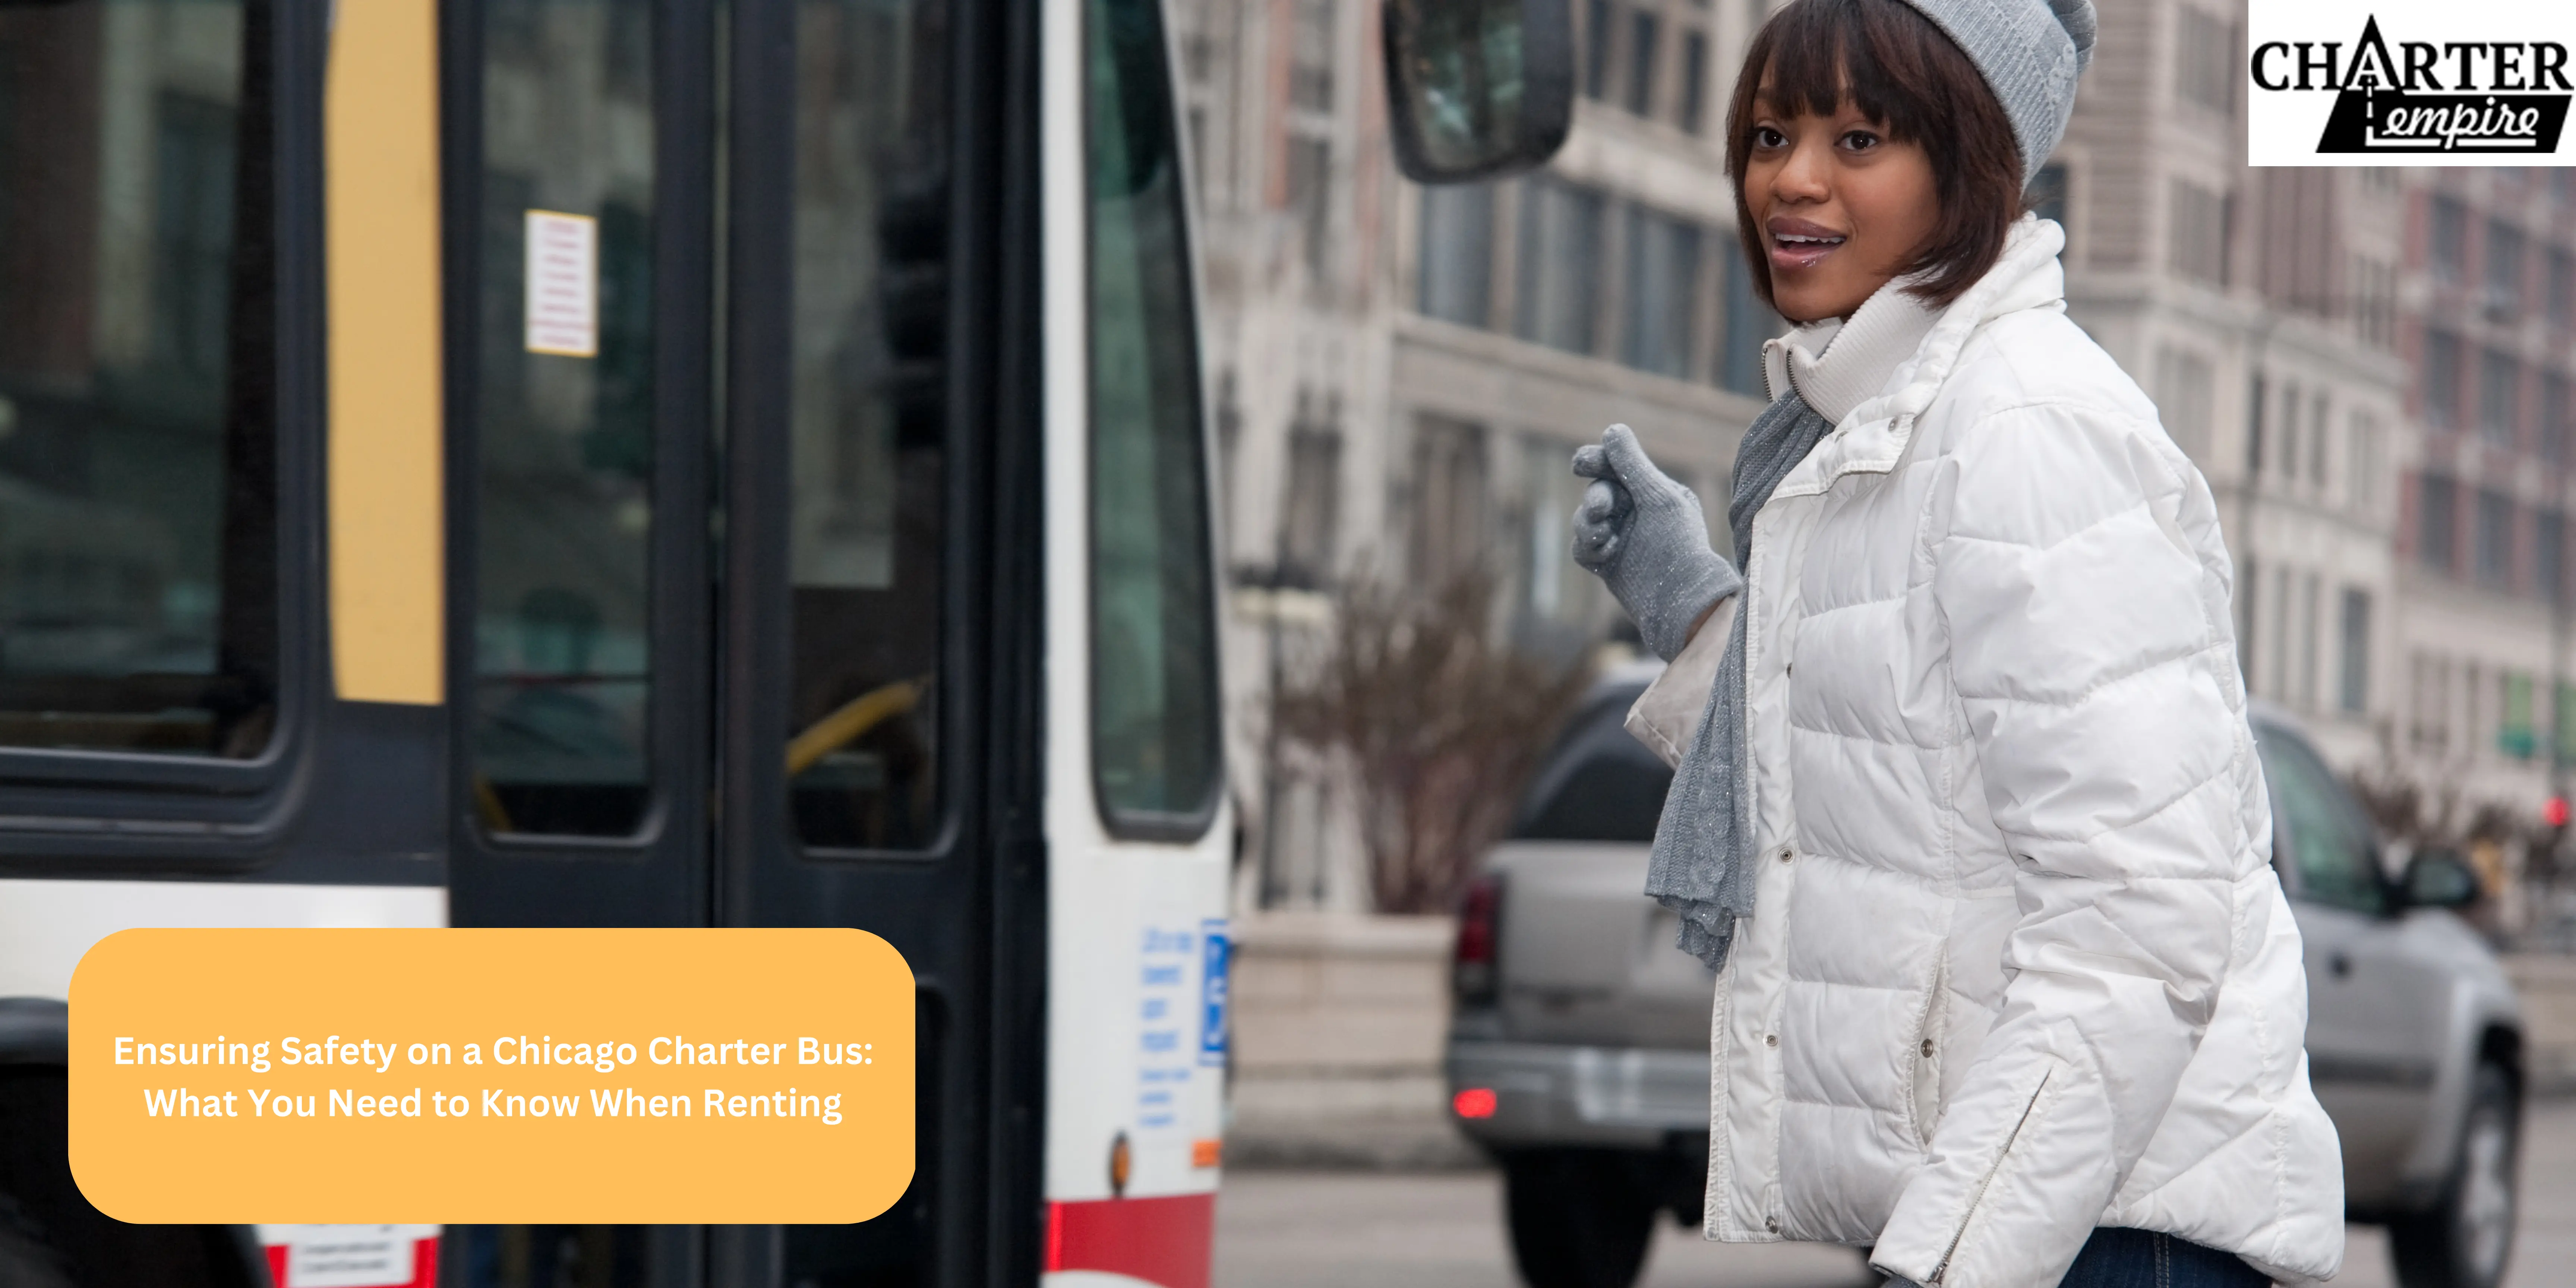 Ensuring Safety on a Chicago Charter Bus: What You Need to Know When Renting